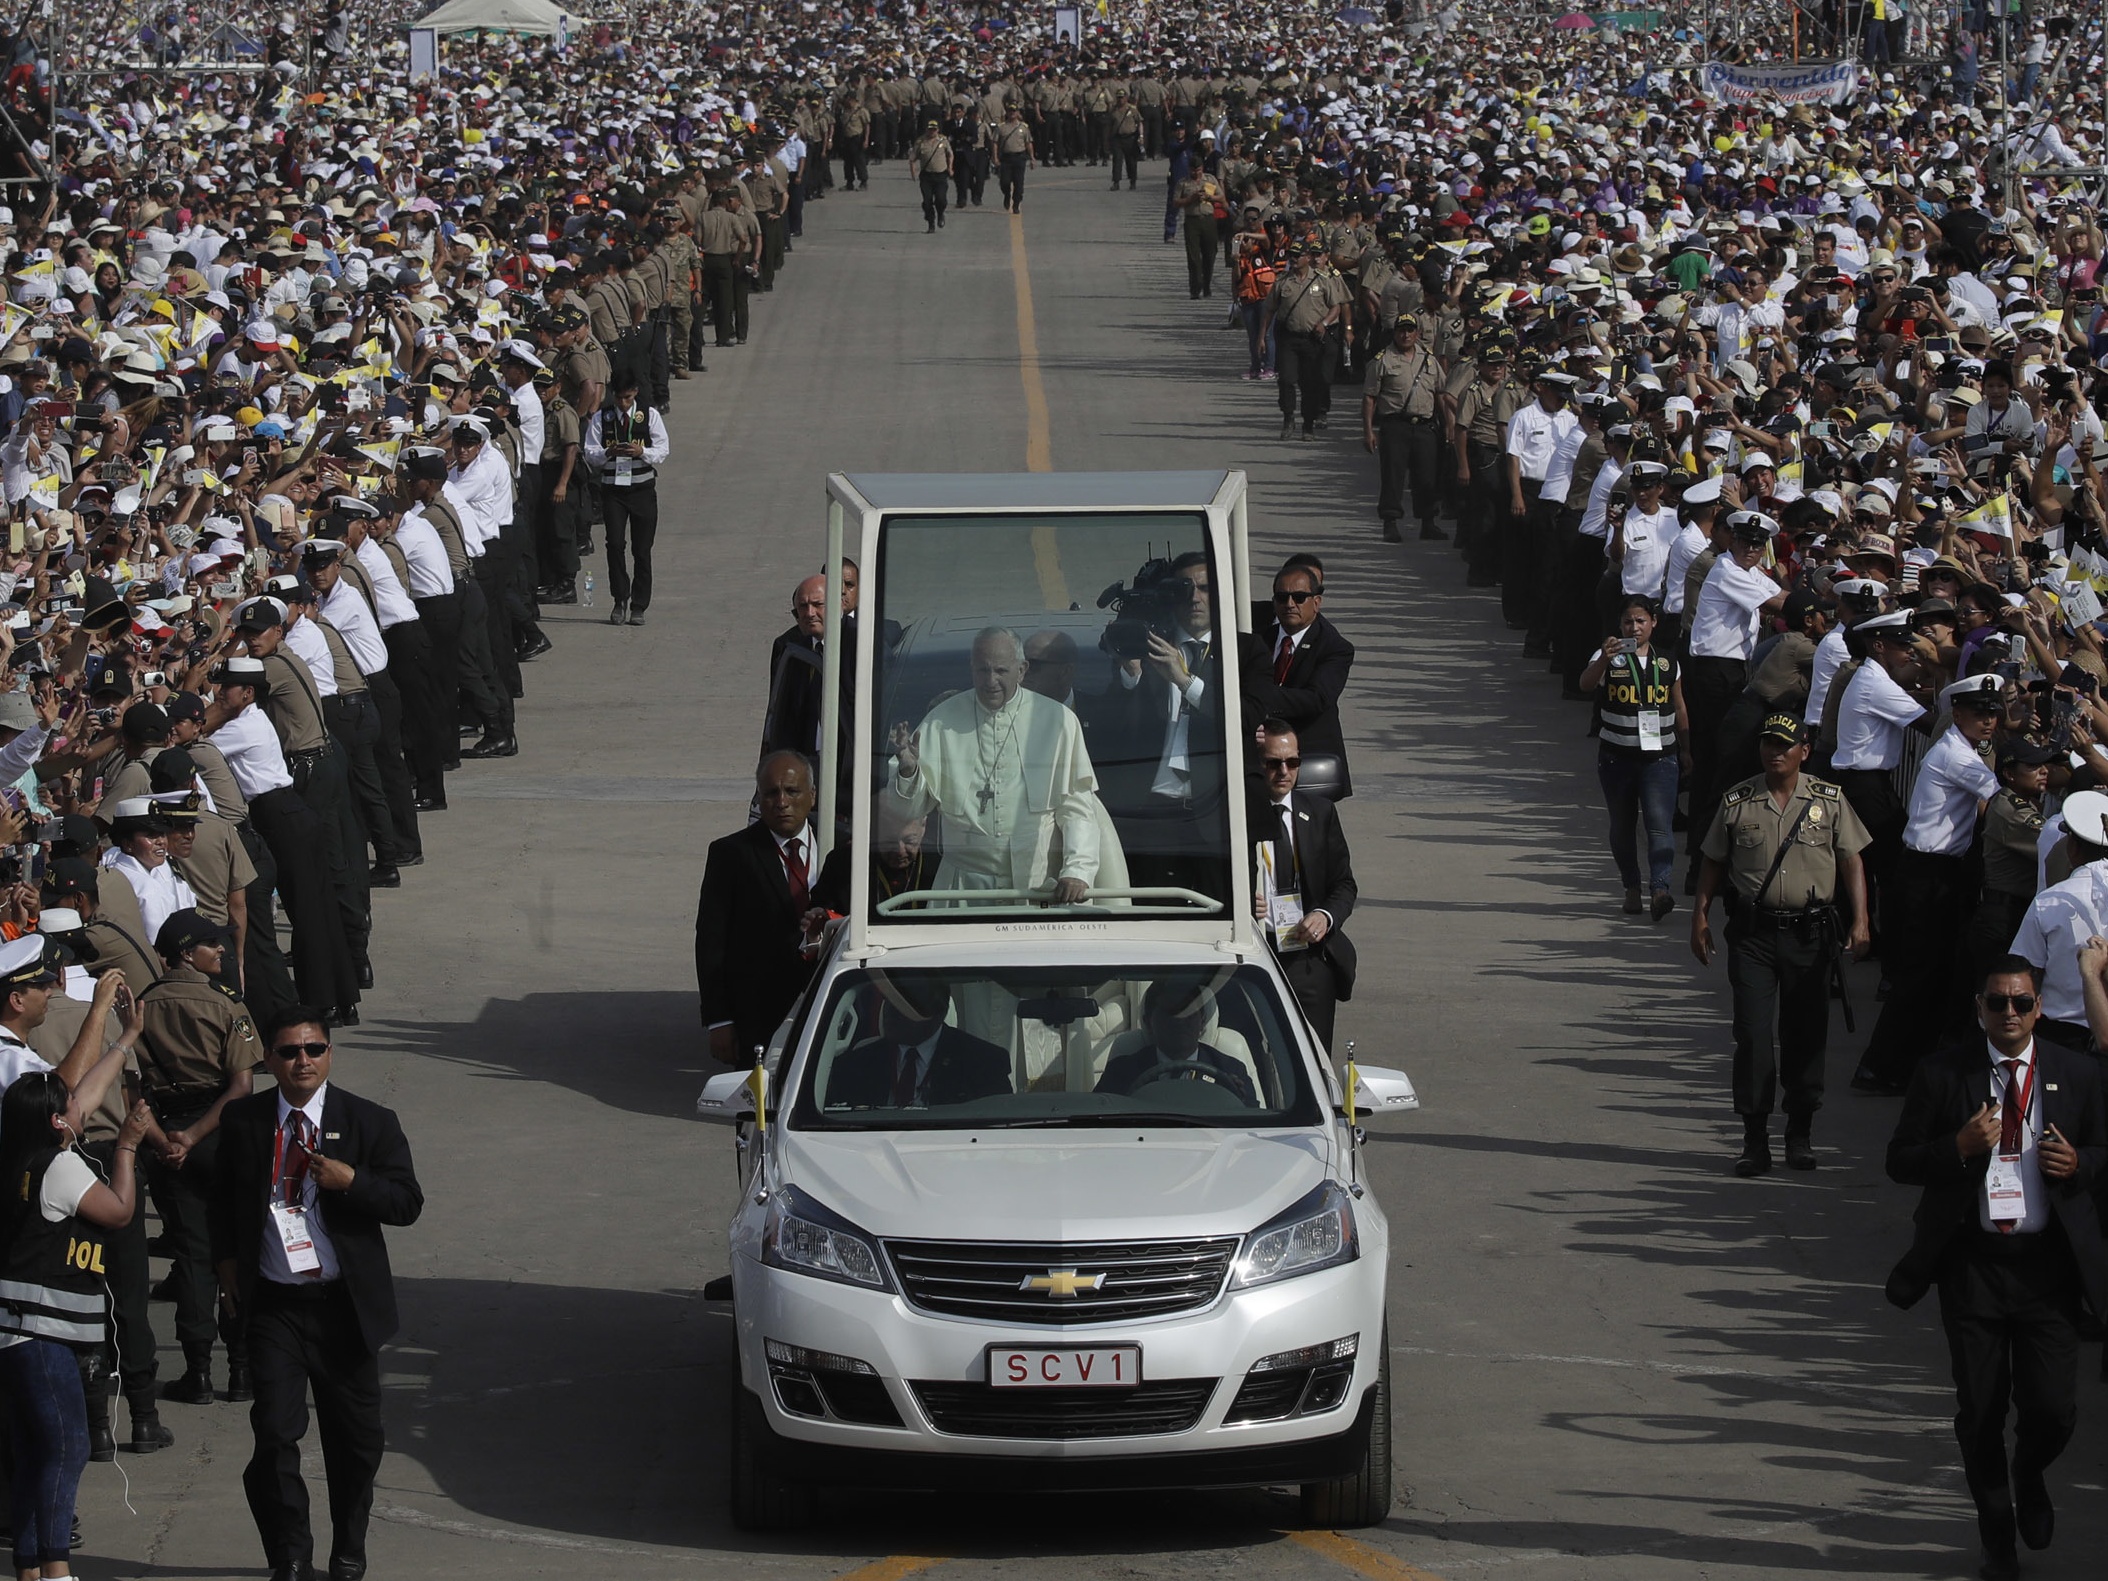 Pope Francis arriving for a mass in Lima on the Peru leg of his trip (Alessandra Tarantino/AP)